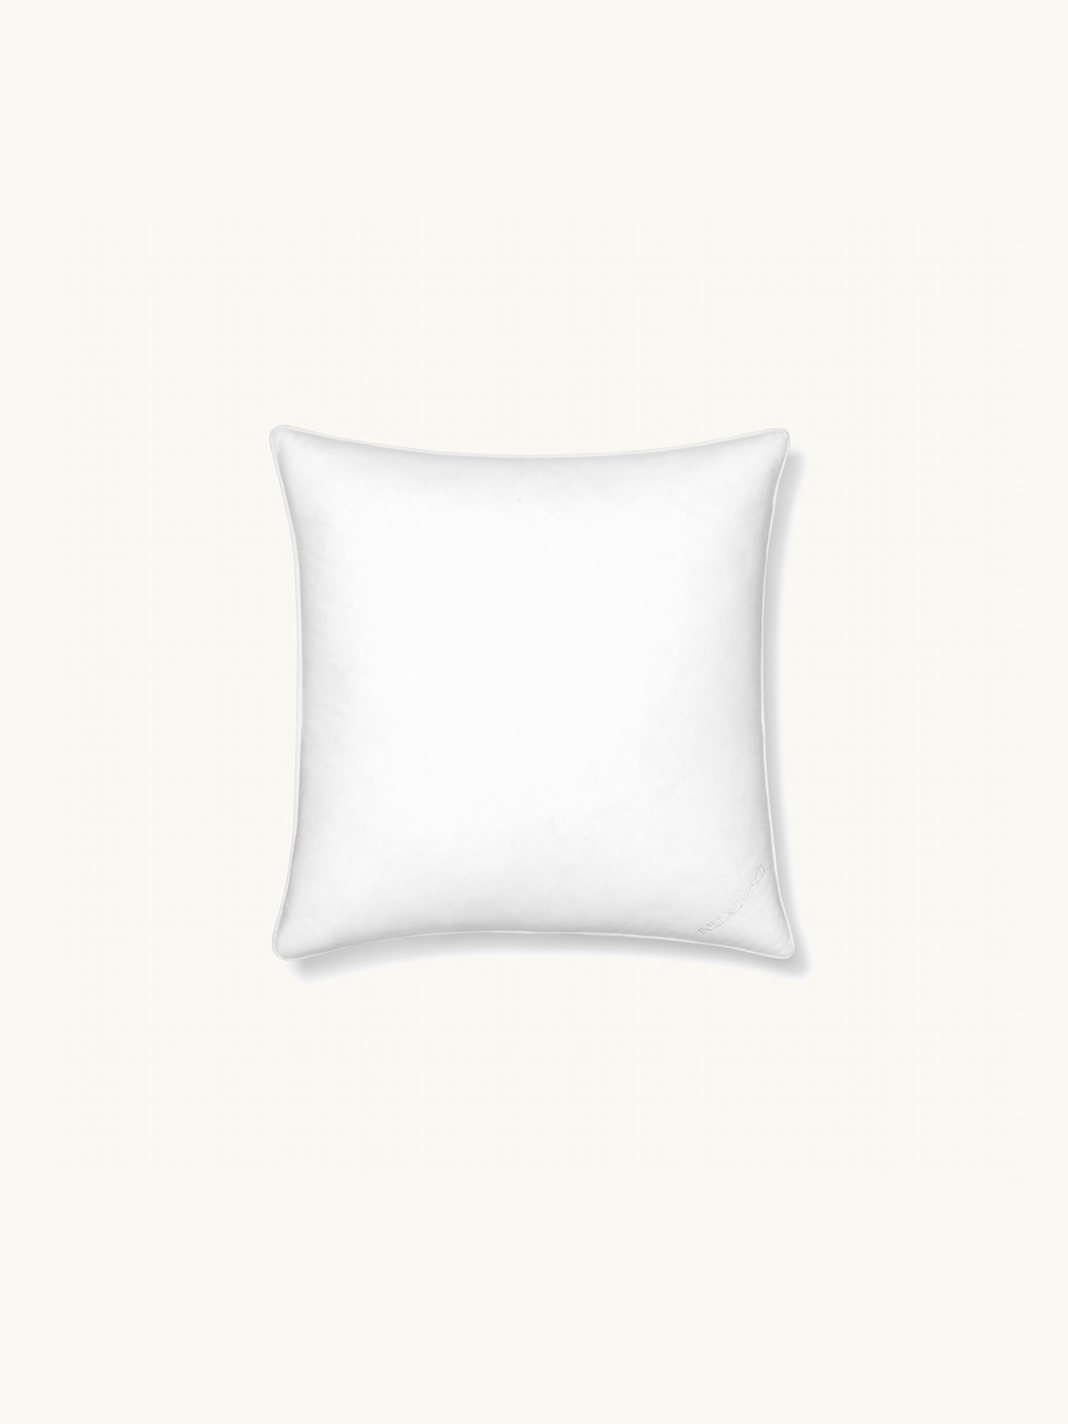 undefined Feather Down Decorative Pillow Insert (20x20) - Slide 1